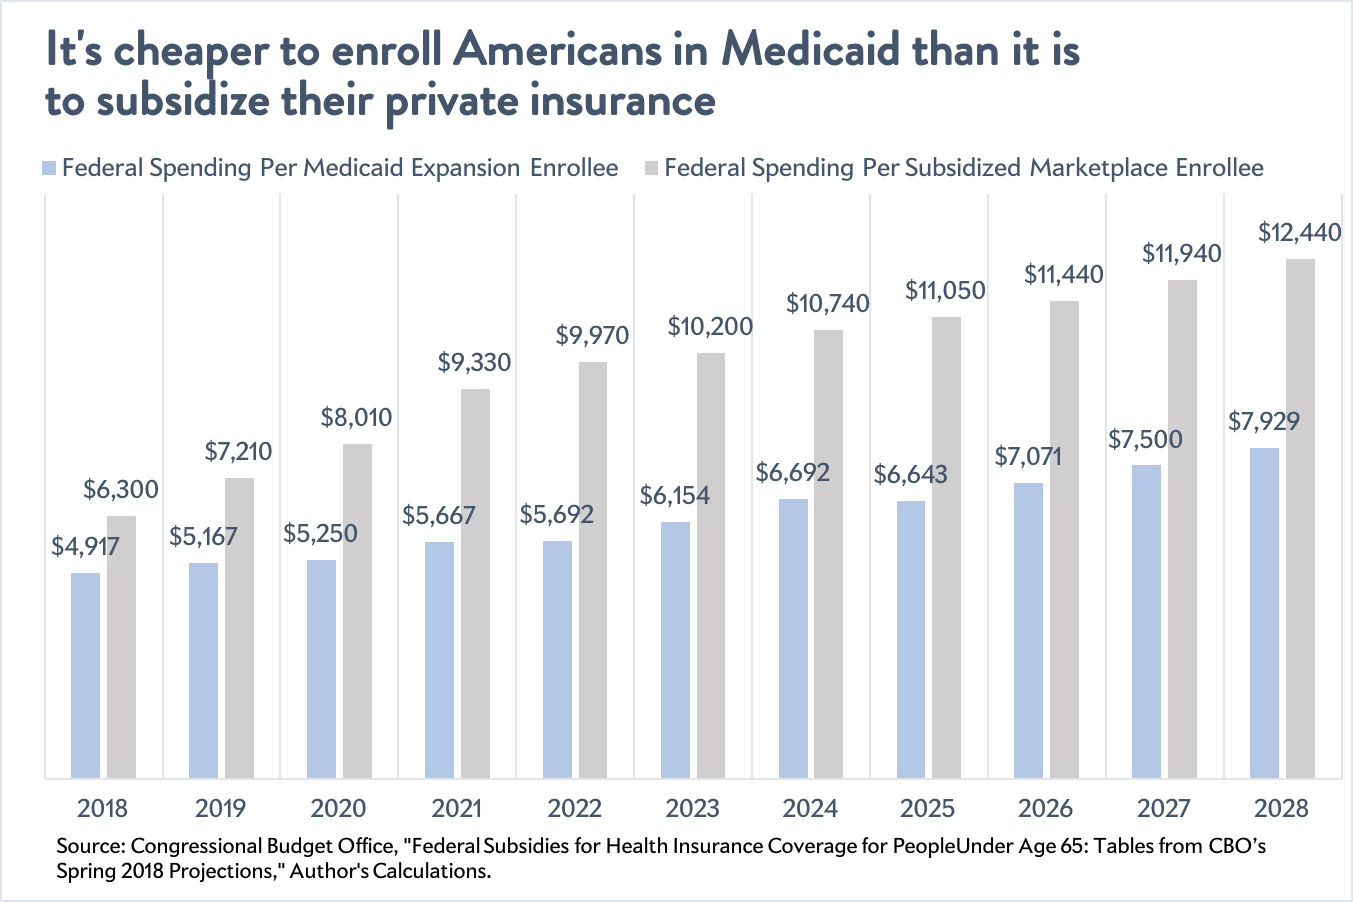 Cost of subsidizing coverage on Obamacare's exchanges vs. enrolling Americans in the Medicaid expansion